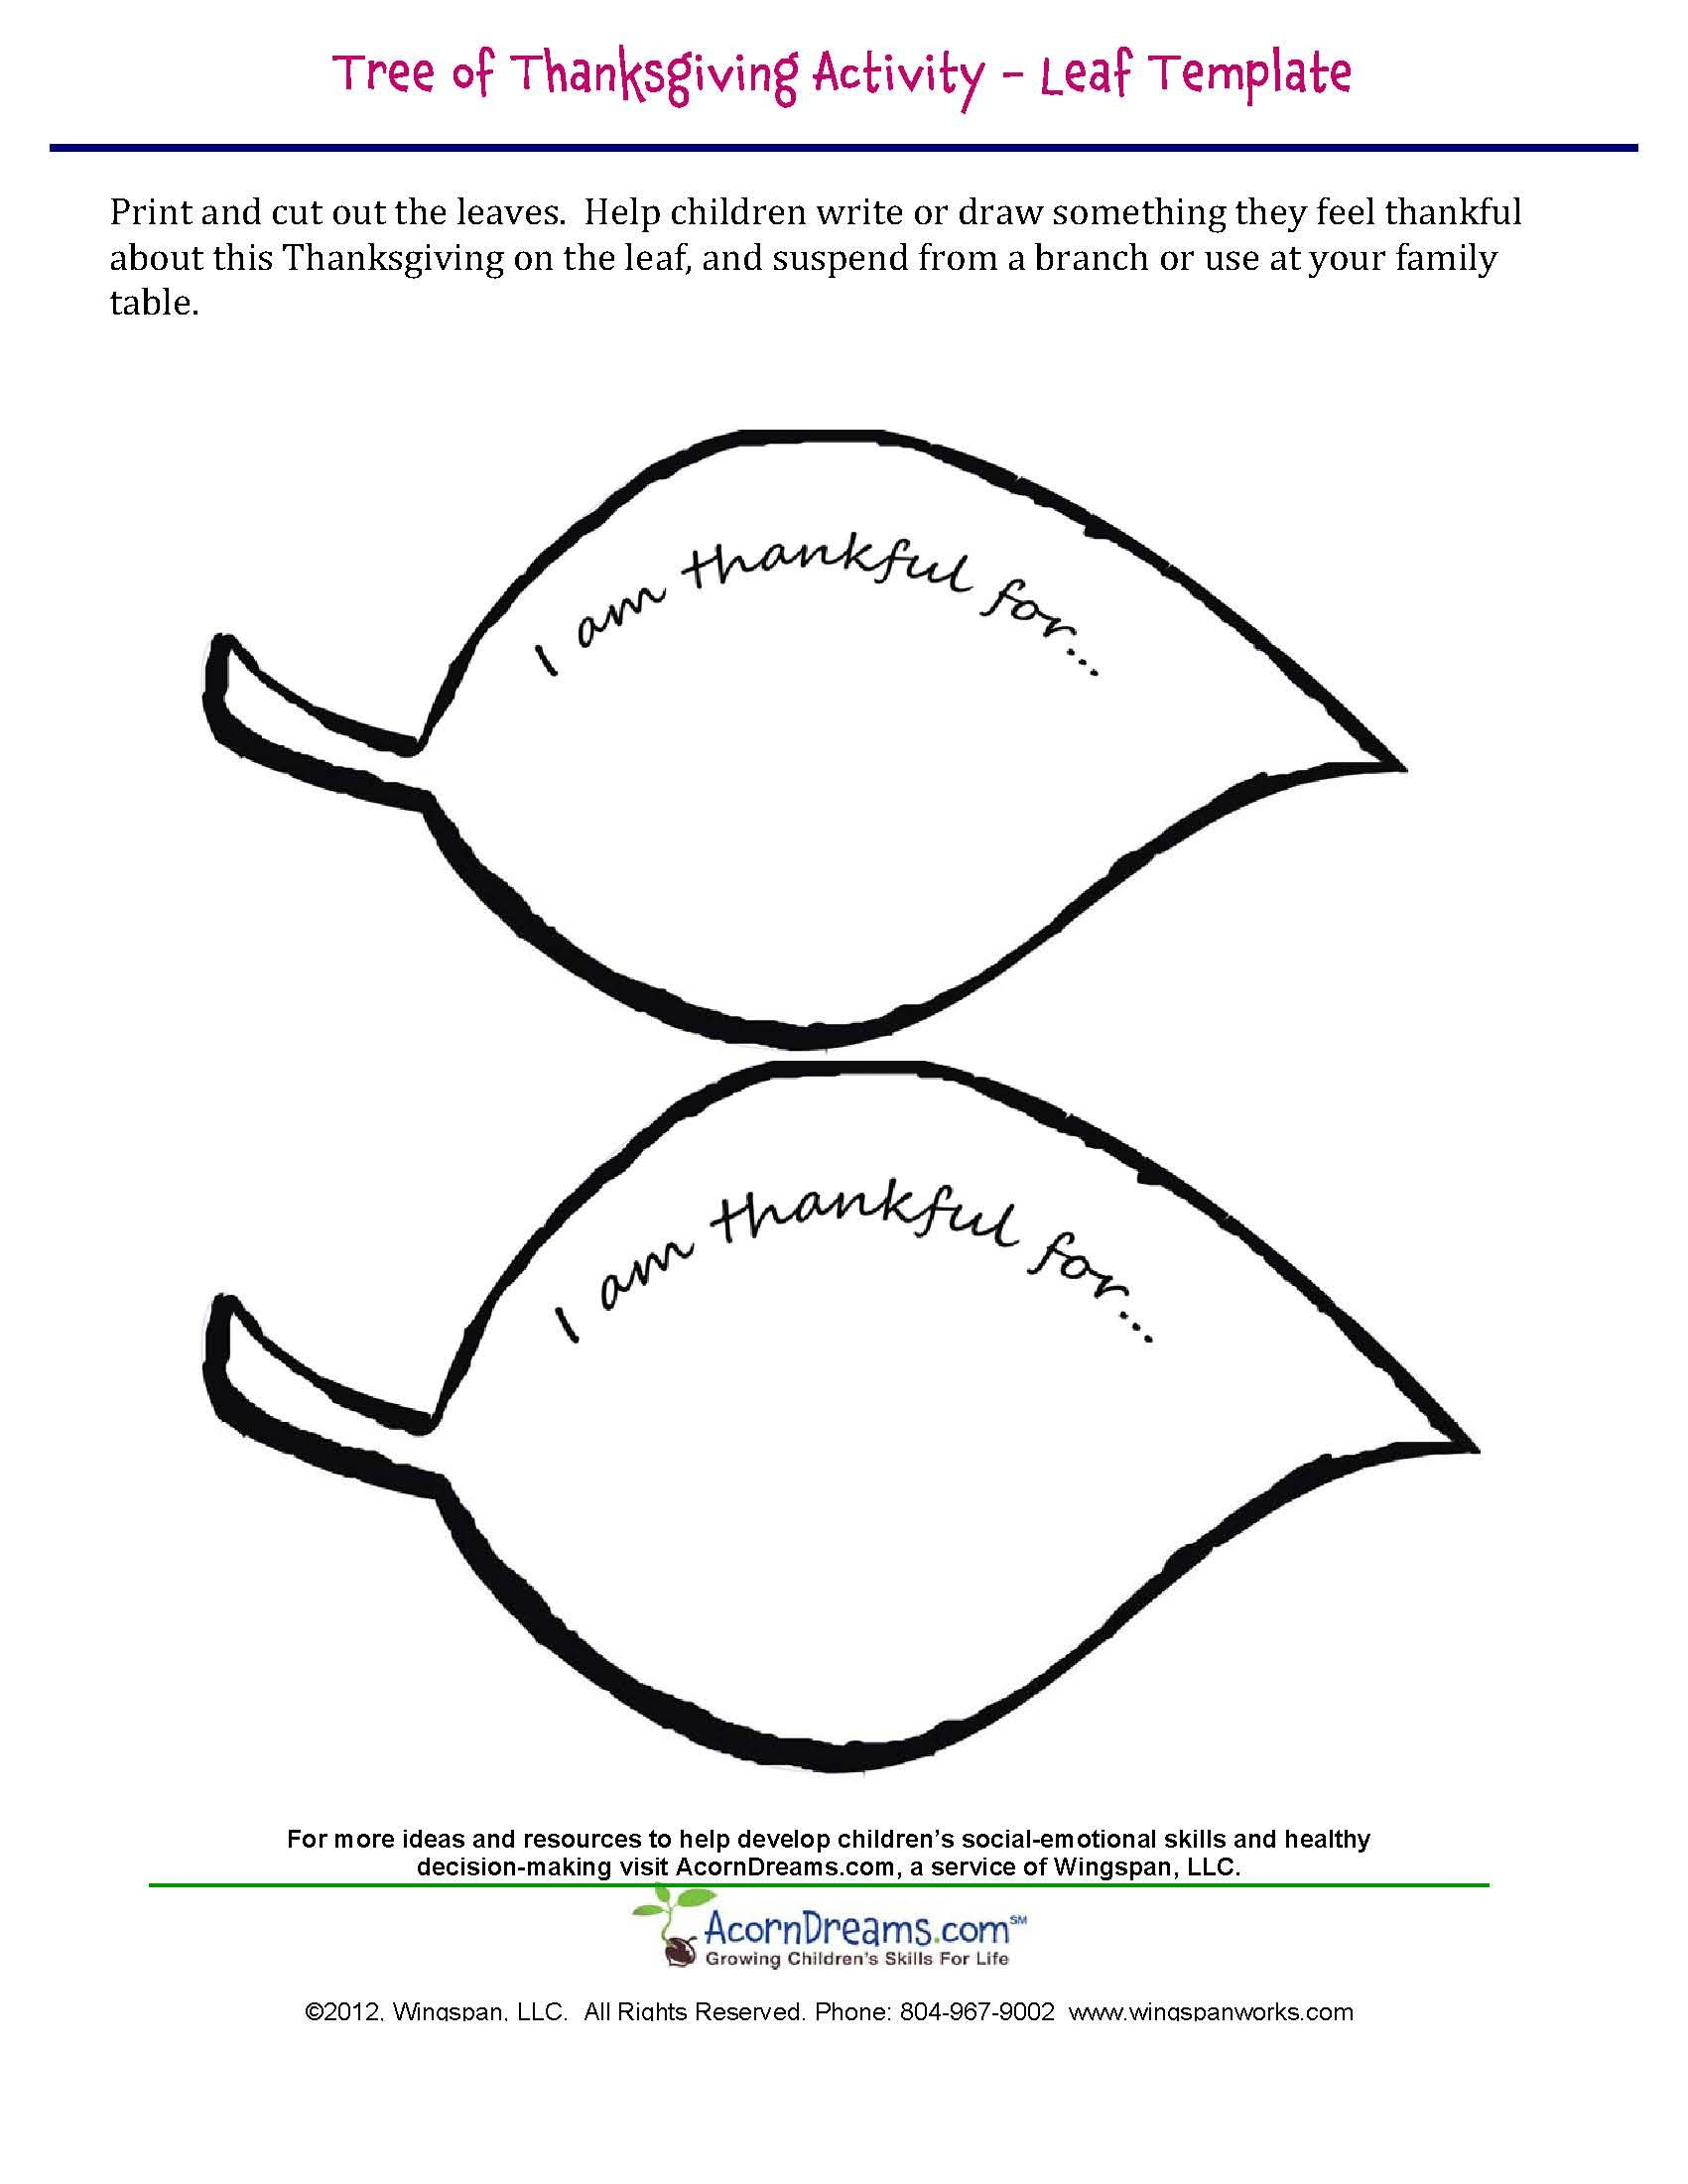 Tree Of Thanksgiving Leaf Template Helping Young Children Focus On 